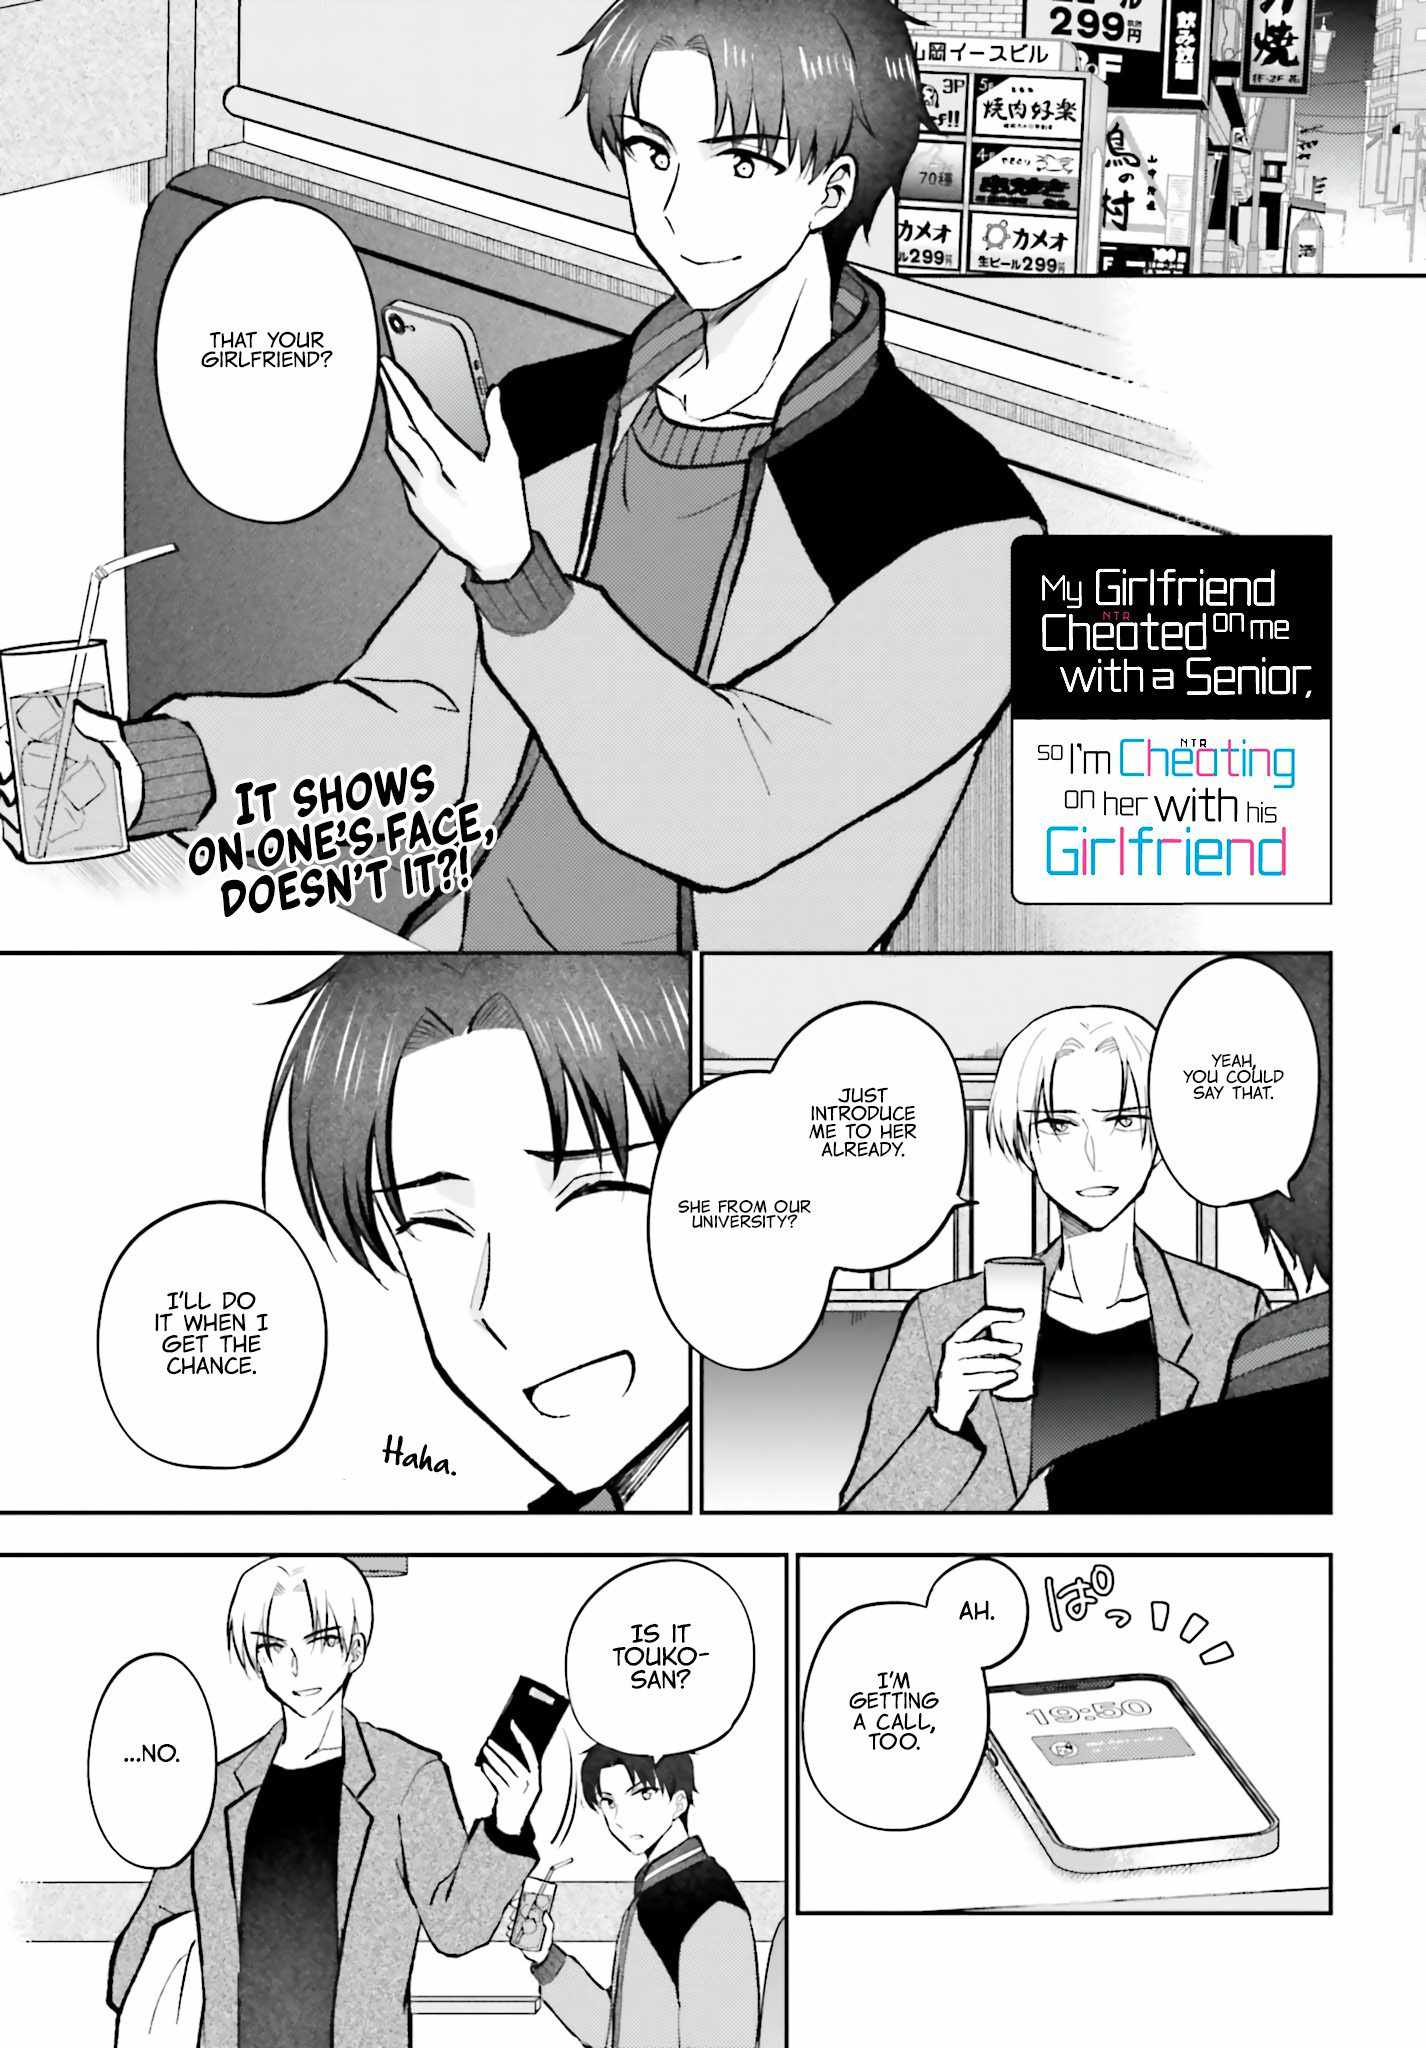 My Girlfriend Cheated on Me With a Senior, so I’m Cheating on Her With His Girlfriend Chapter 13-eng-li - Page 1